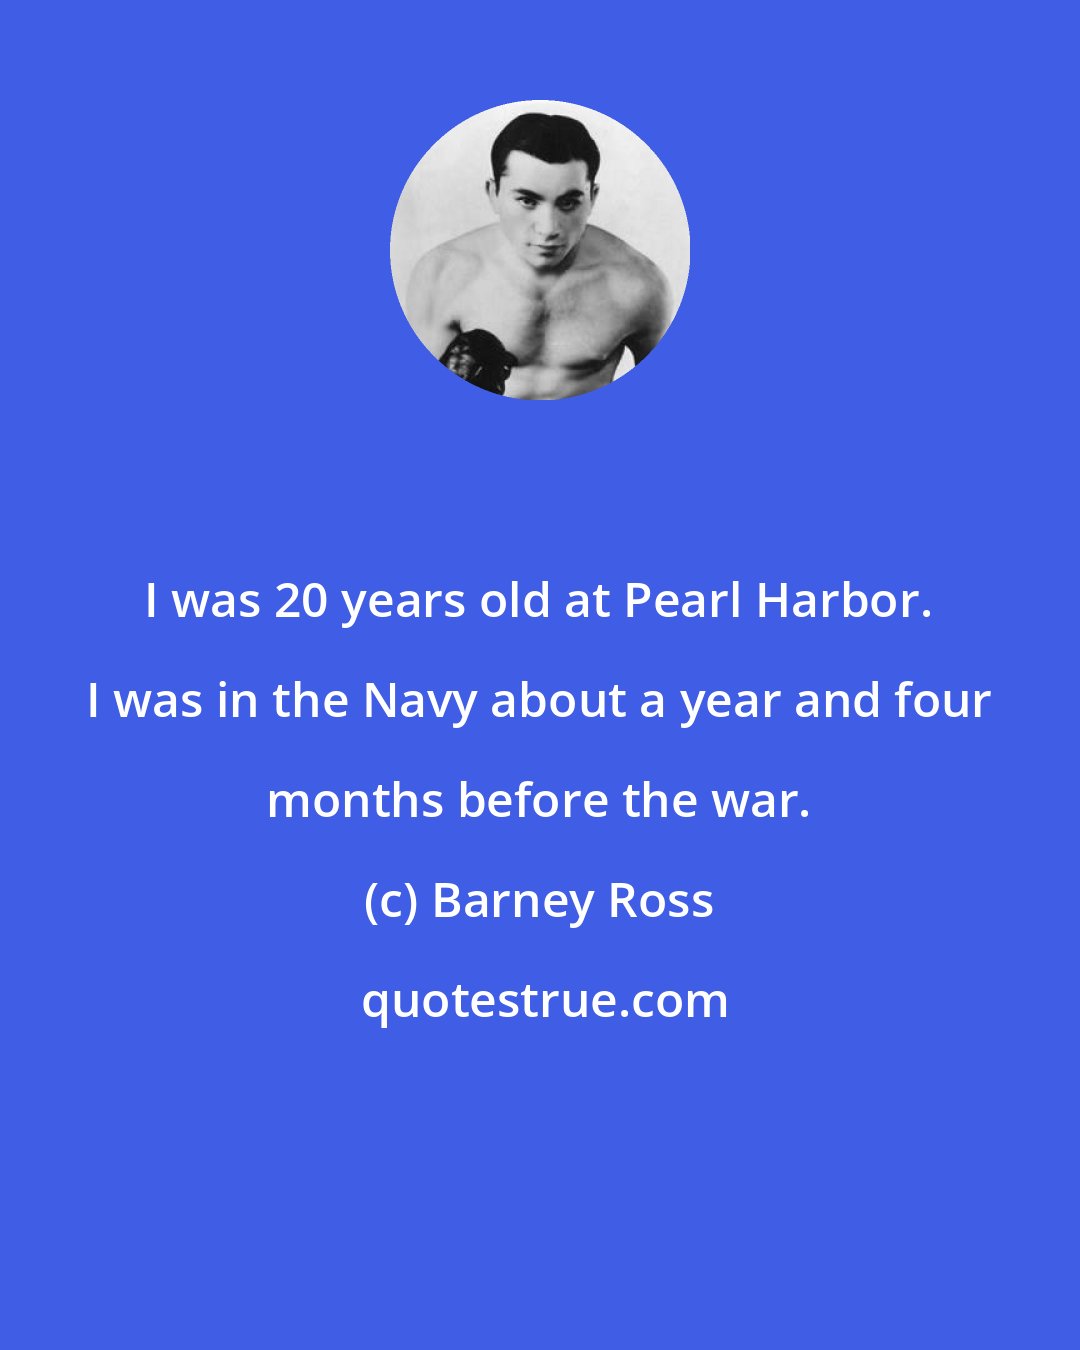 Barney Ross: I was 20 years old at Pearl Harbor. I was in the Navy about a year and four months before the war.